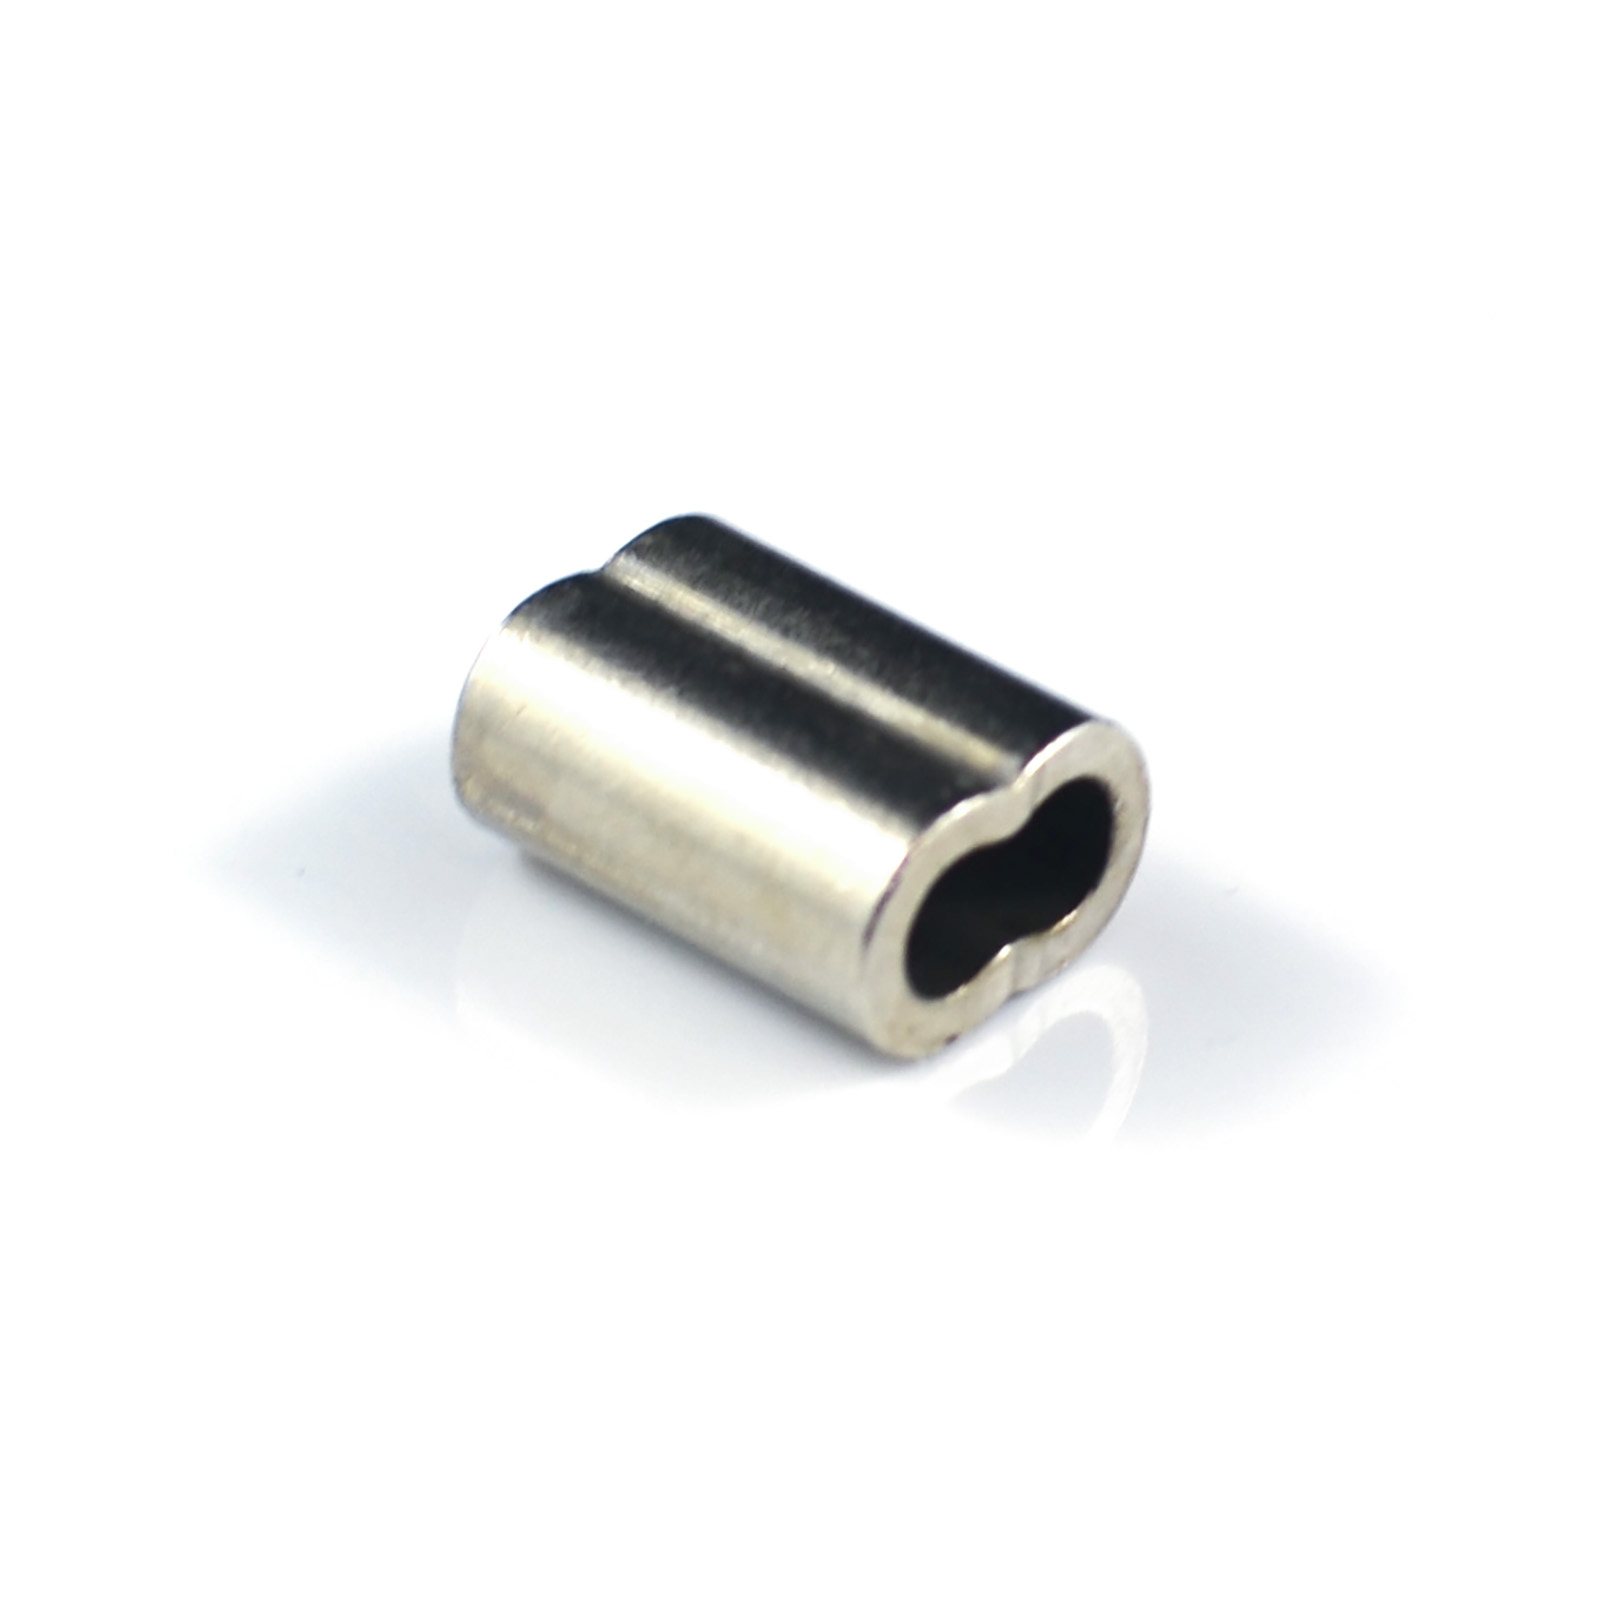 Nickel Plated Copper Ferrule for 1.5mm Wire Rope